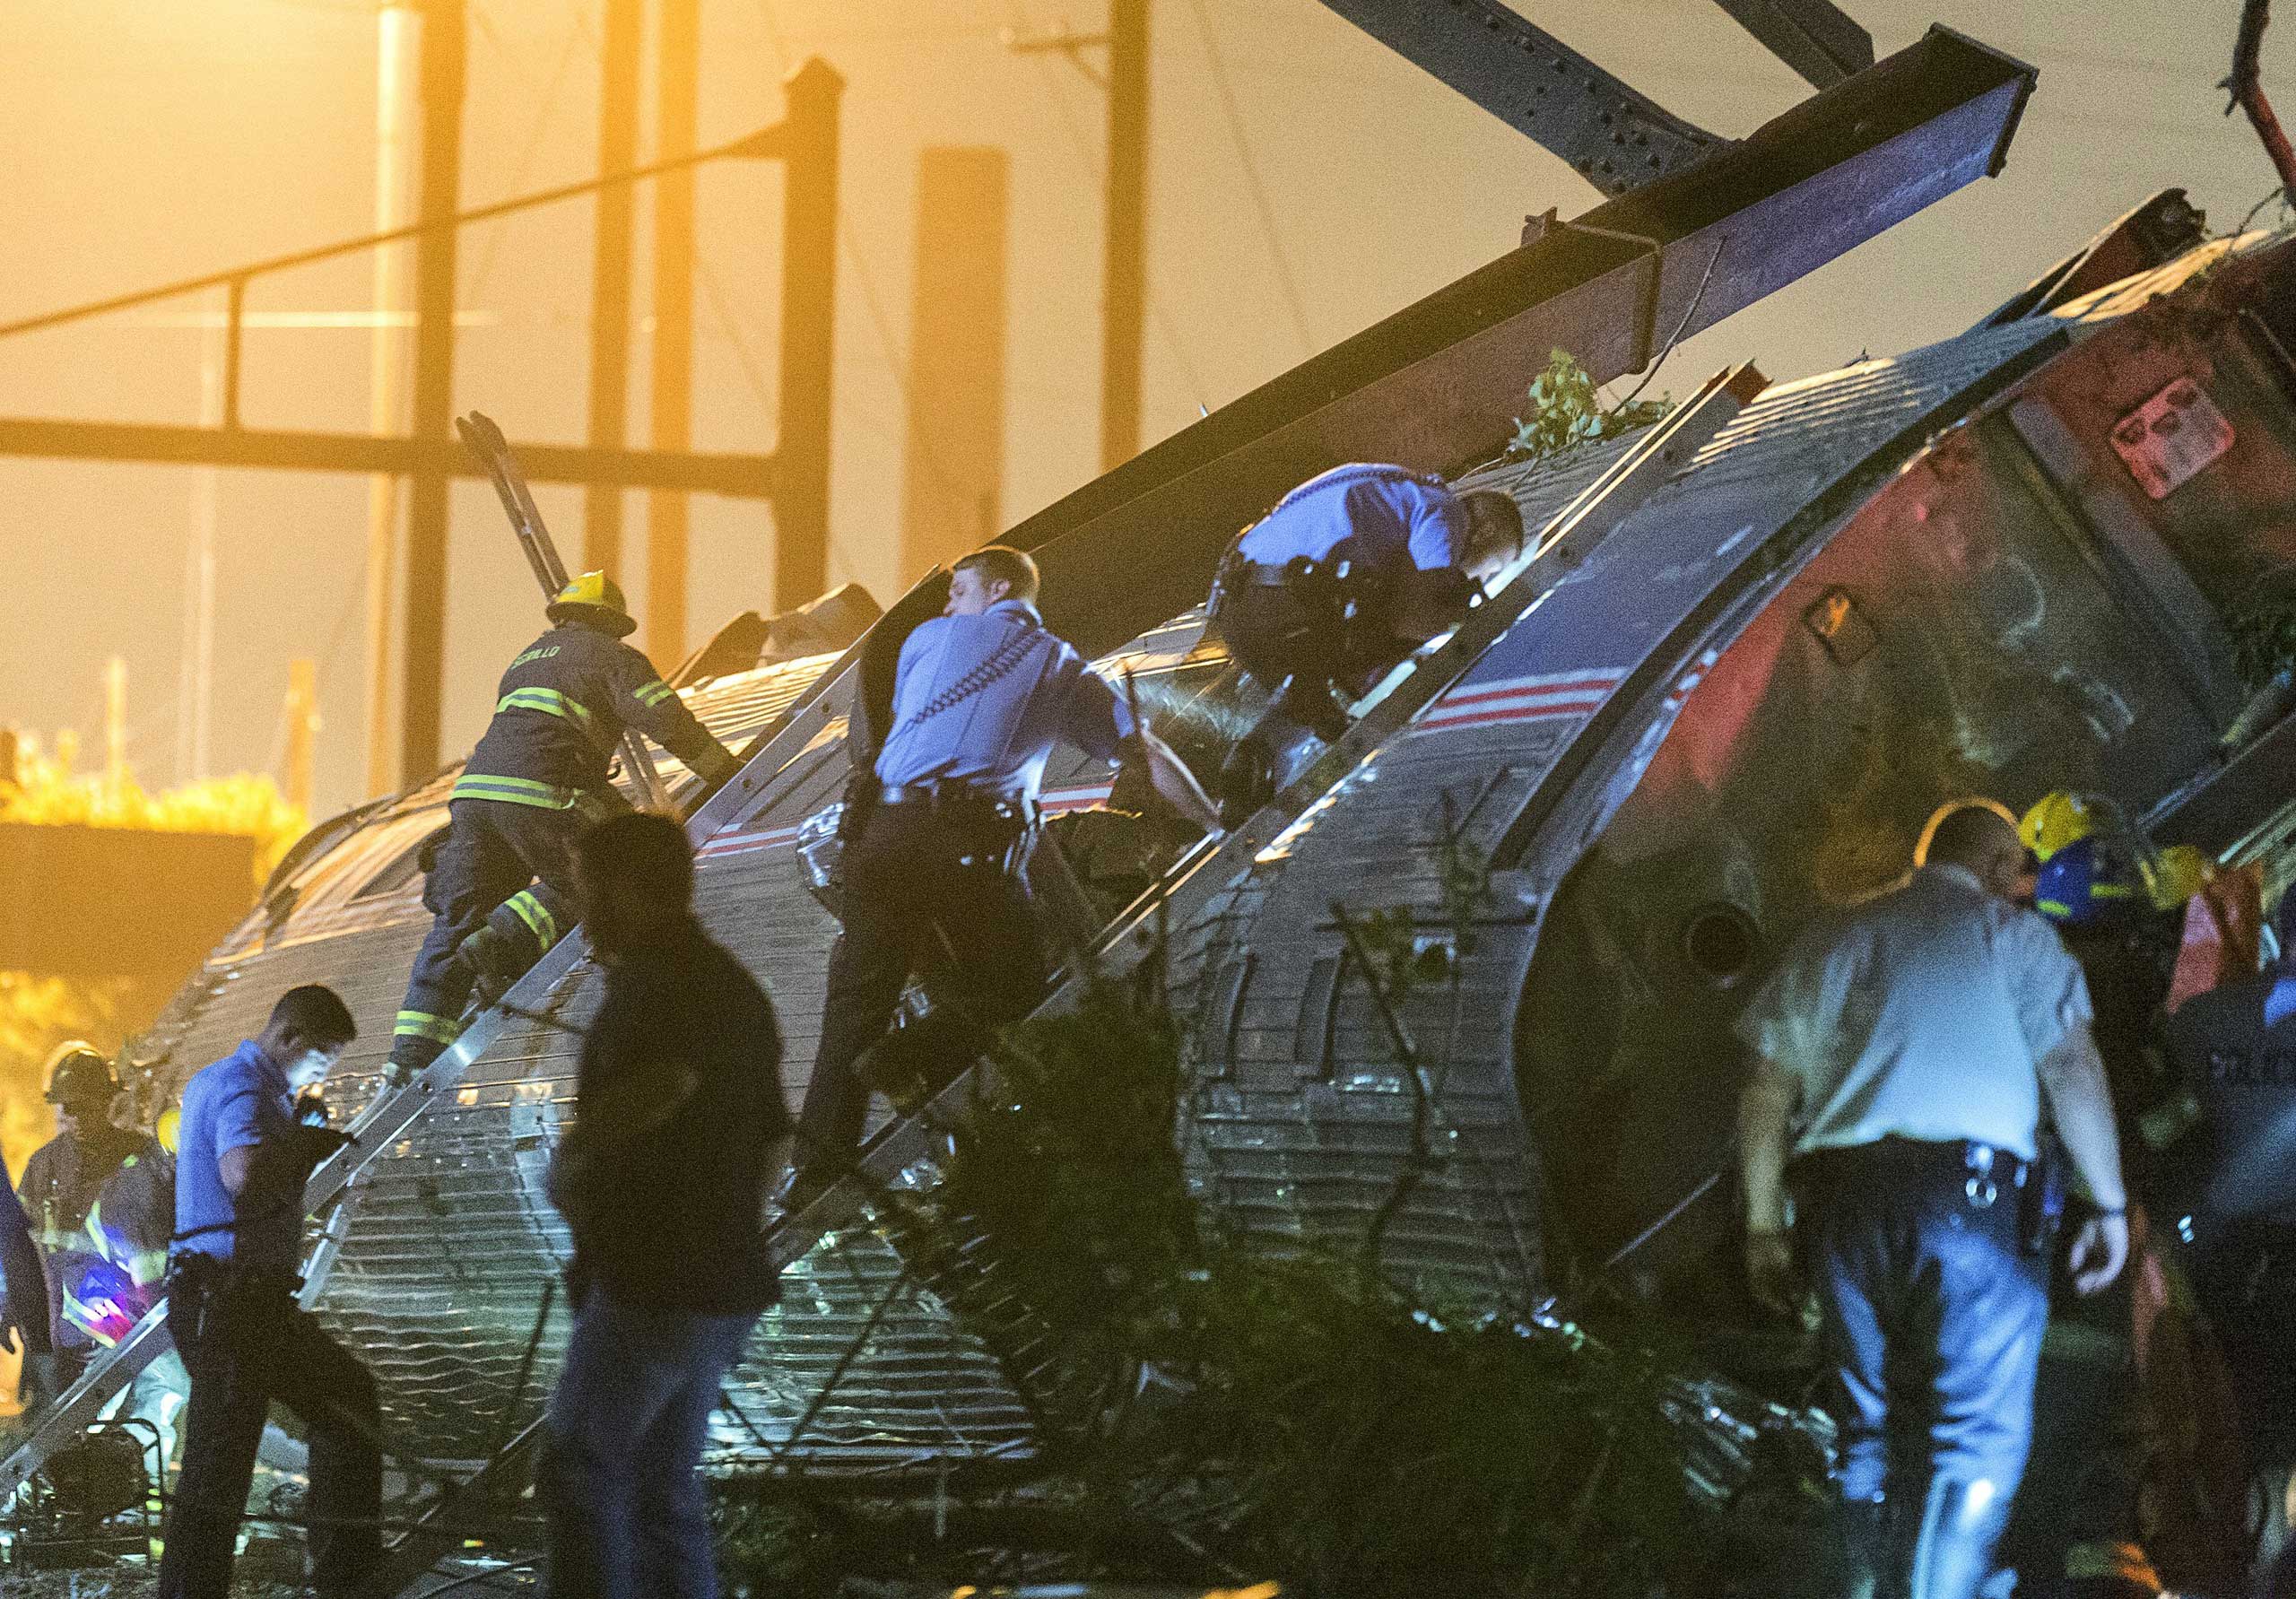 Rescue workers climb into the wreckage of a derailed Amtrak train to search for victims in Philadelphia on May 12, 2015. (Bryan Woolston—Reuters)